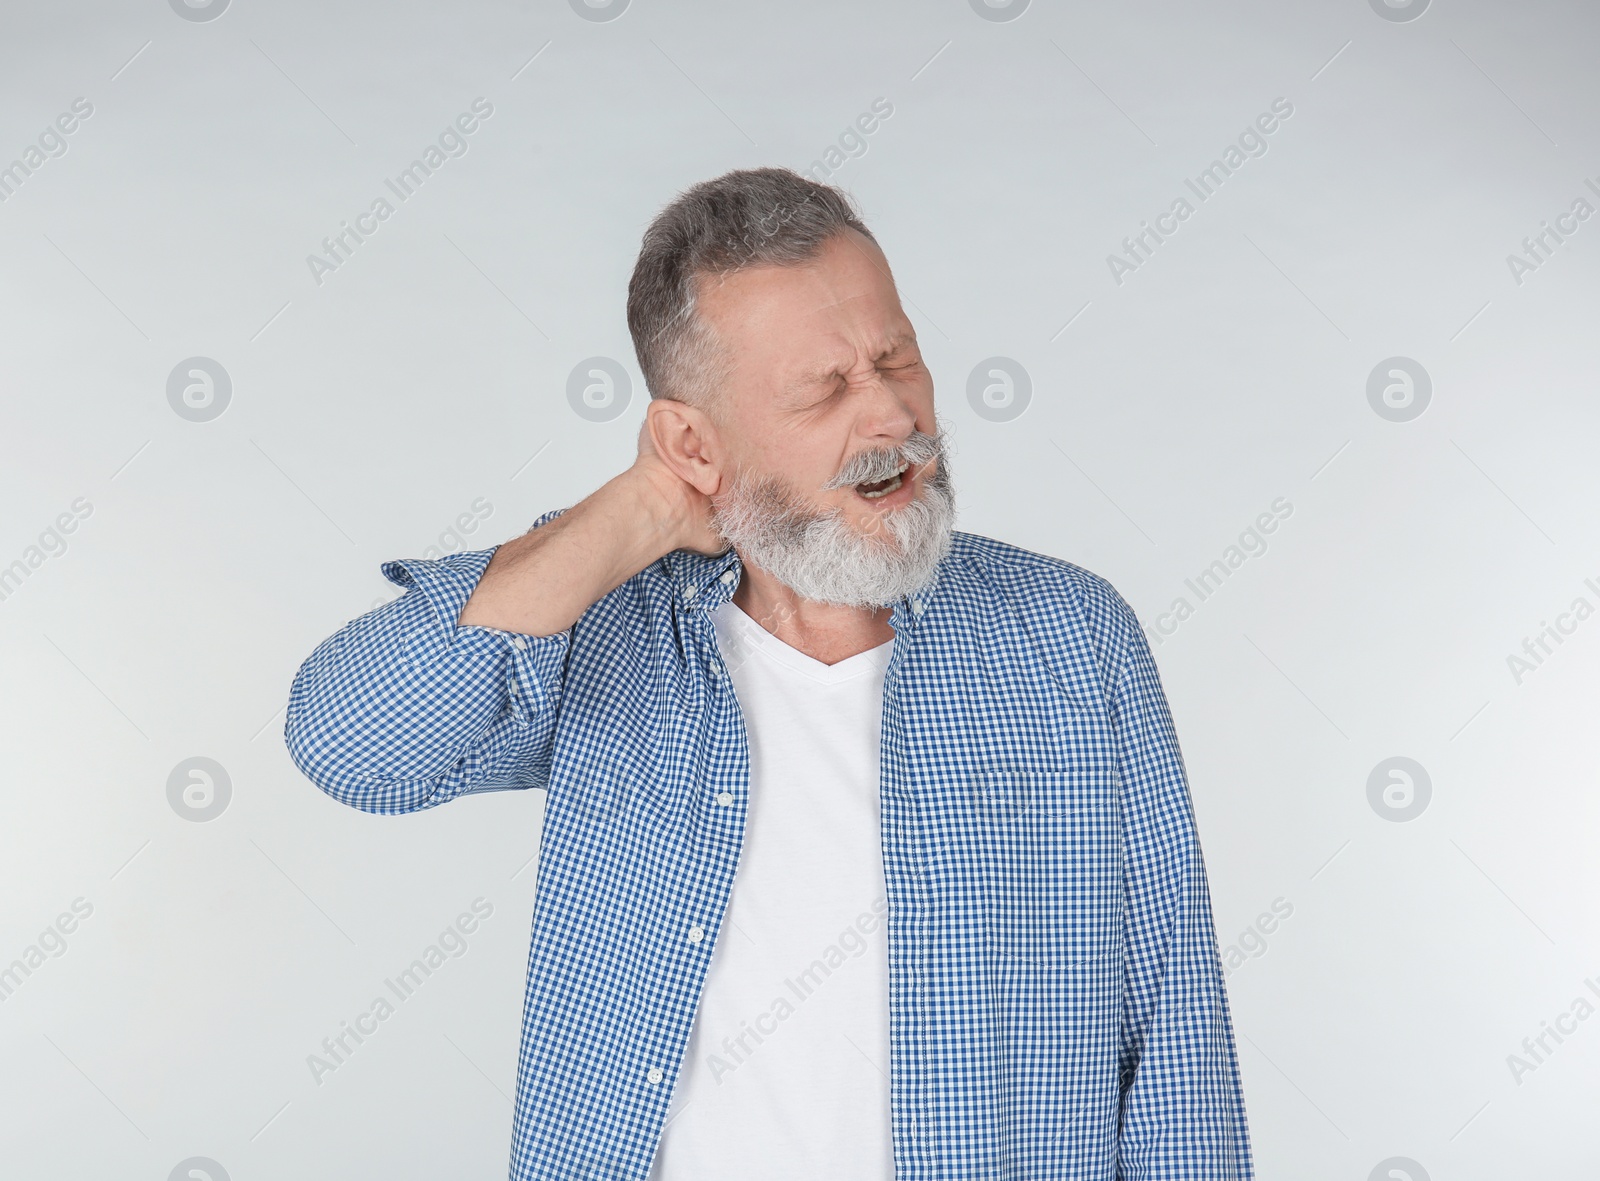 Photo of Man suffering from neck pain on light background